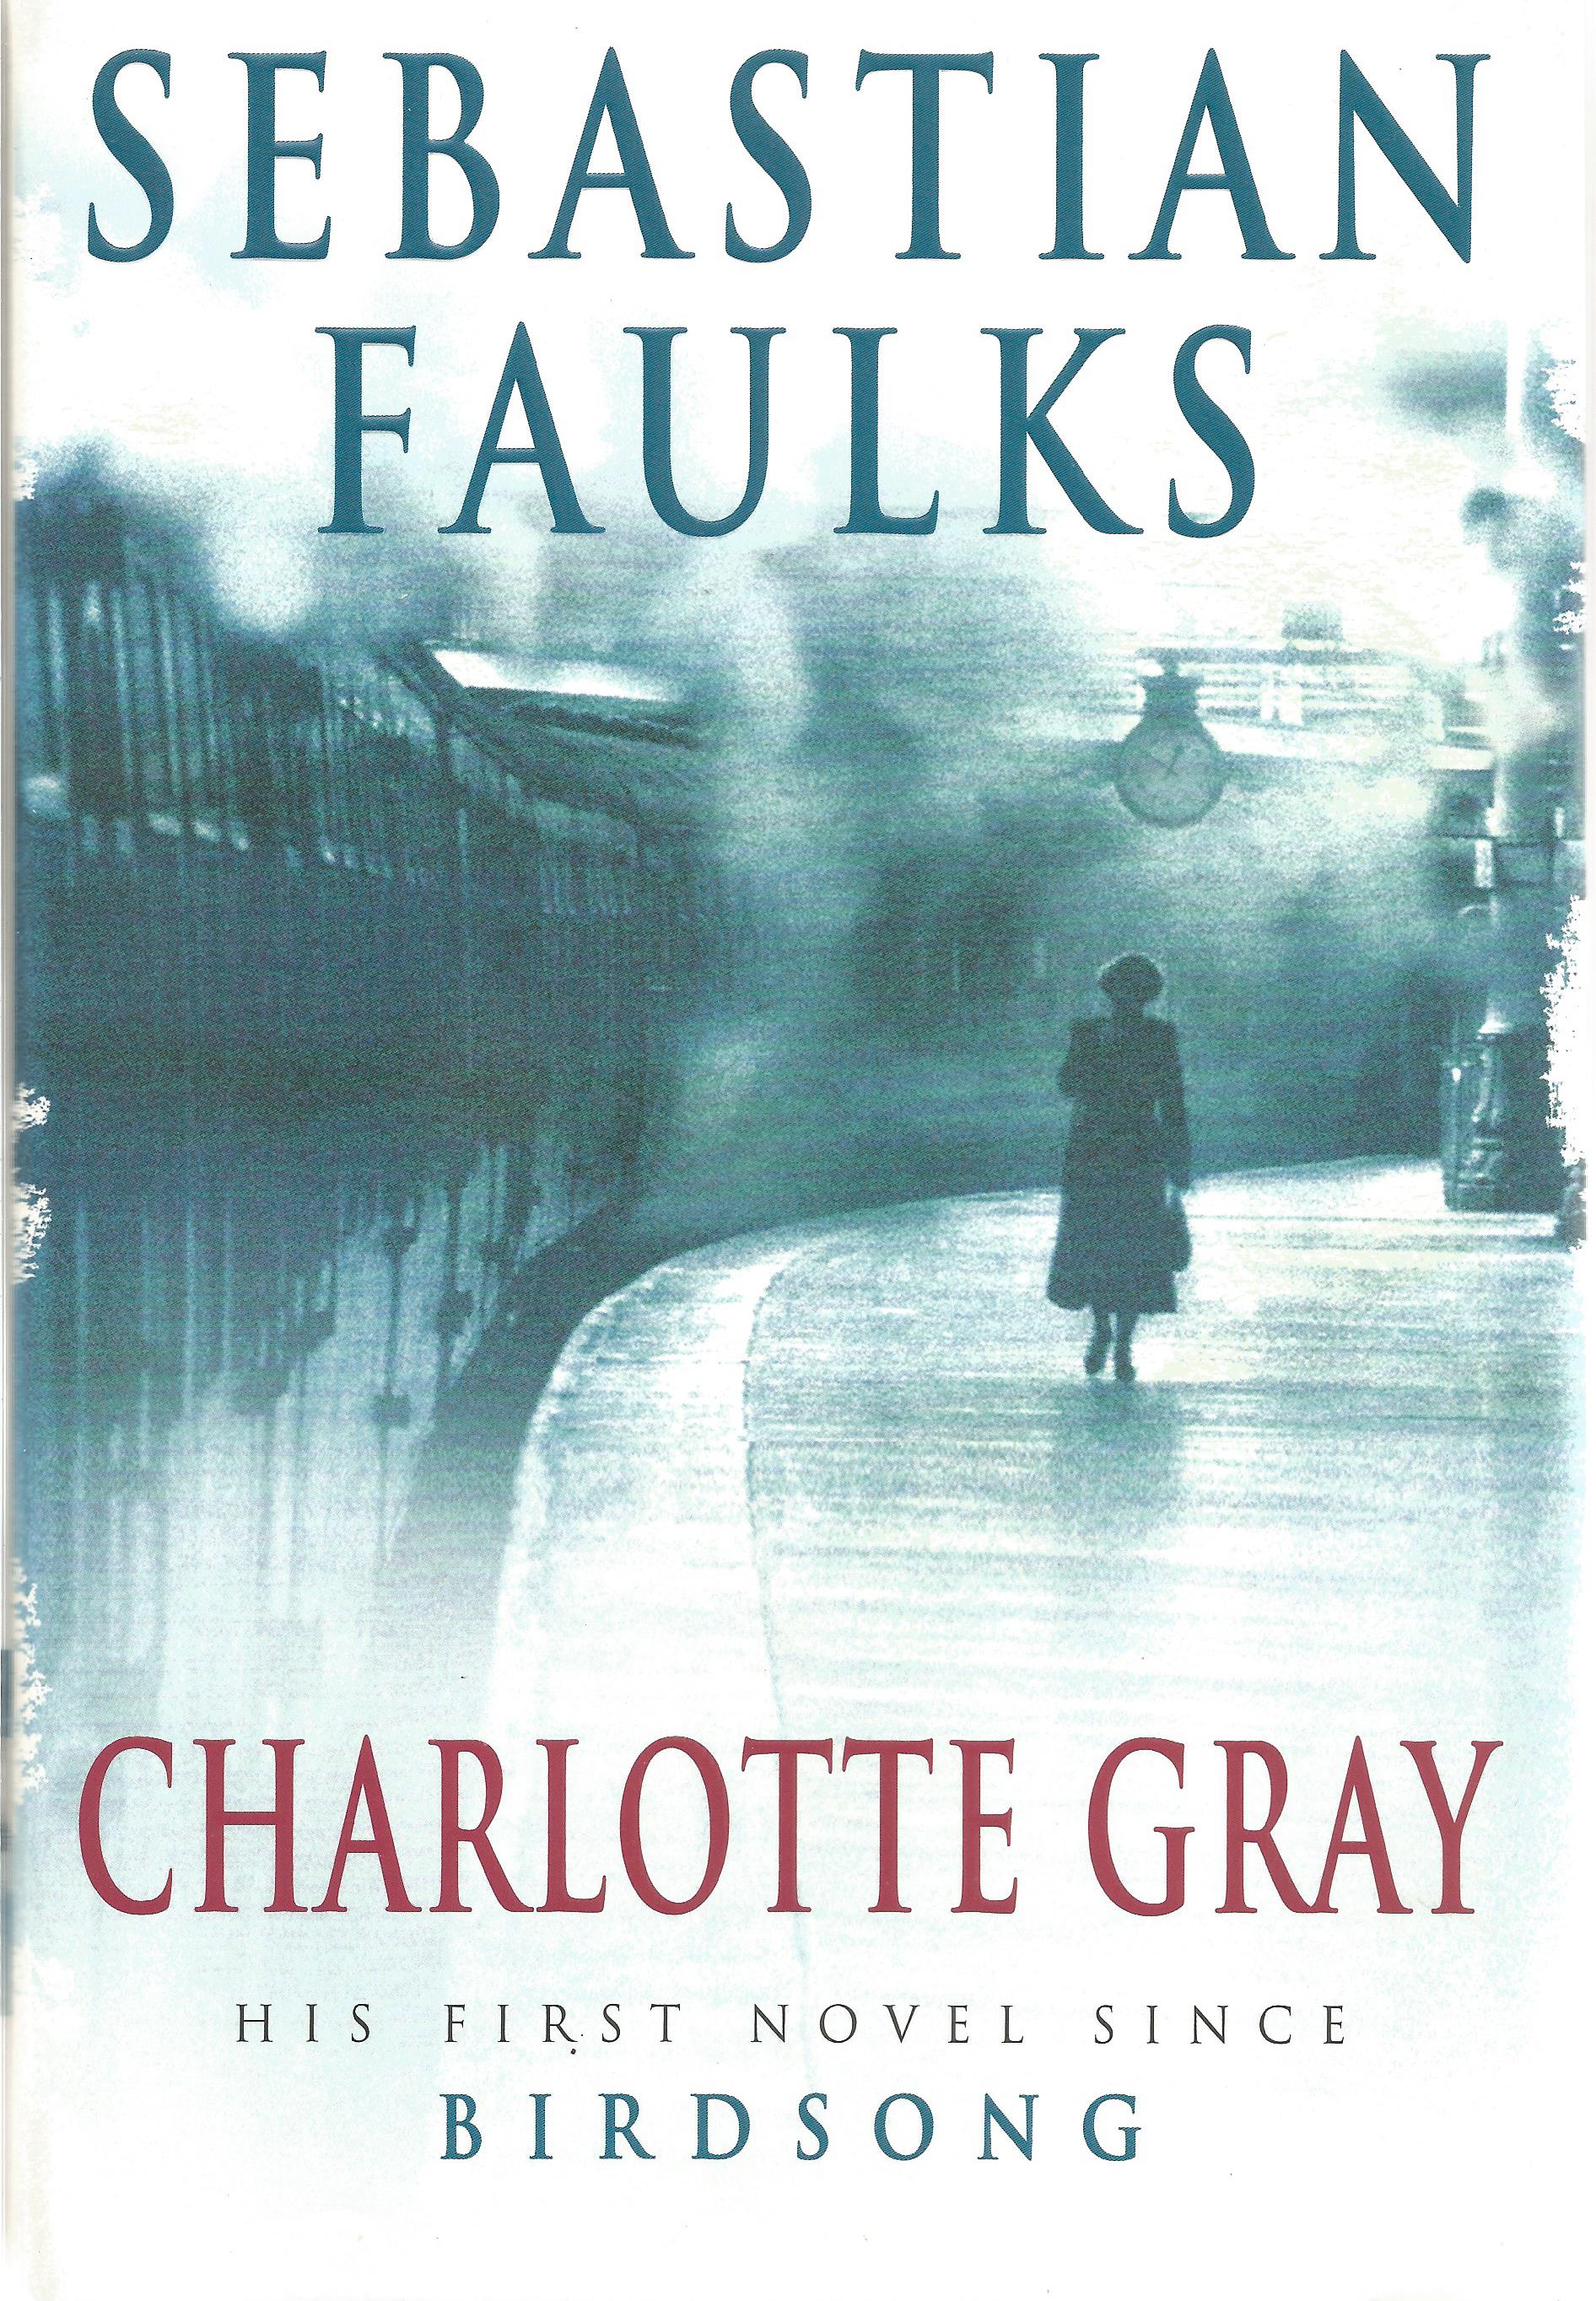 Sebastian Faulks Hardback Book Charlotte Gray signed by the Author on the Title Page dust cover